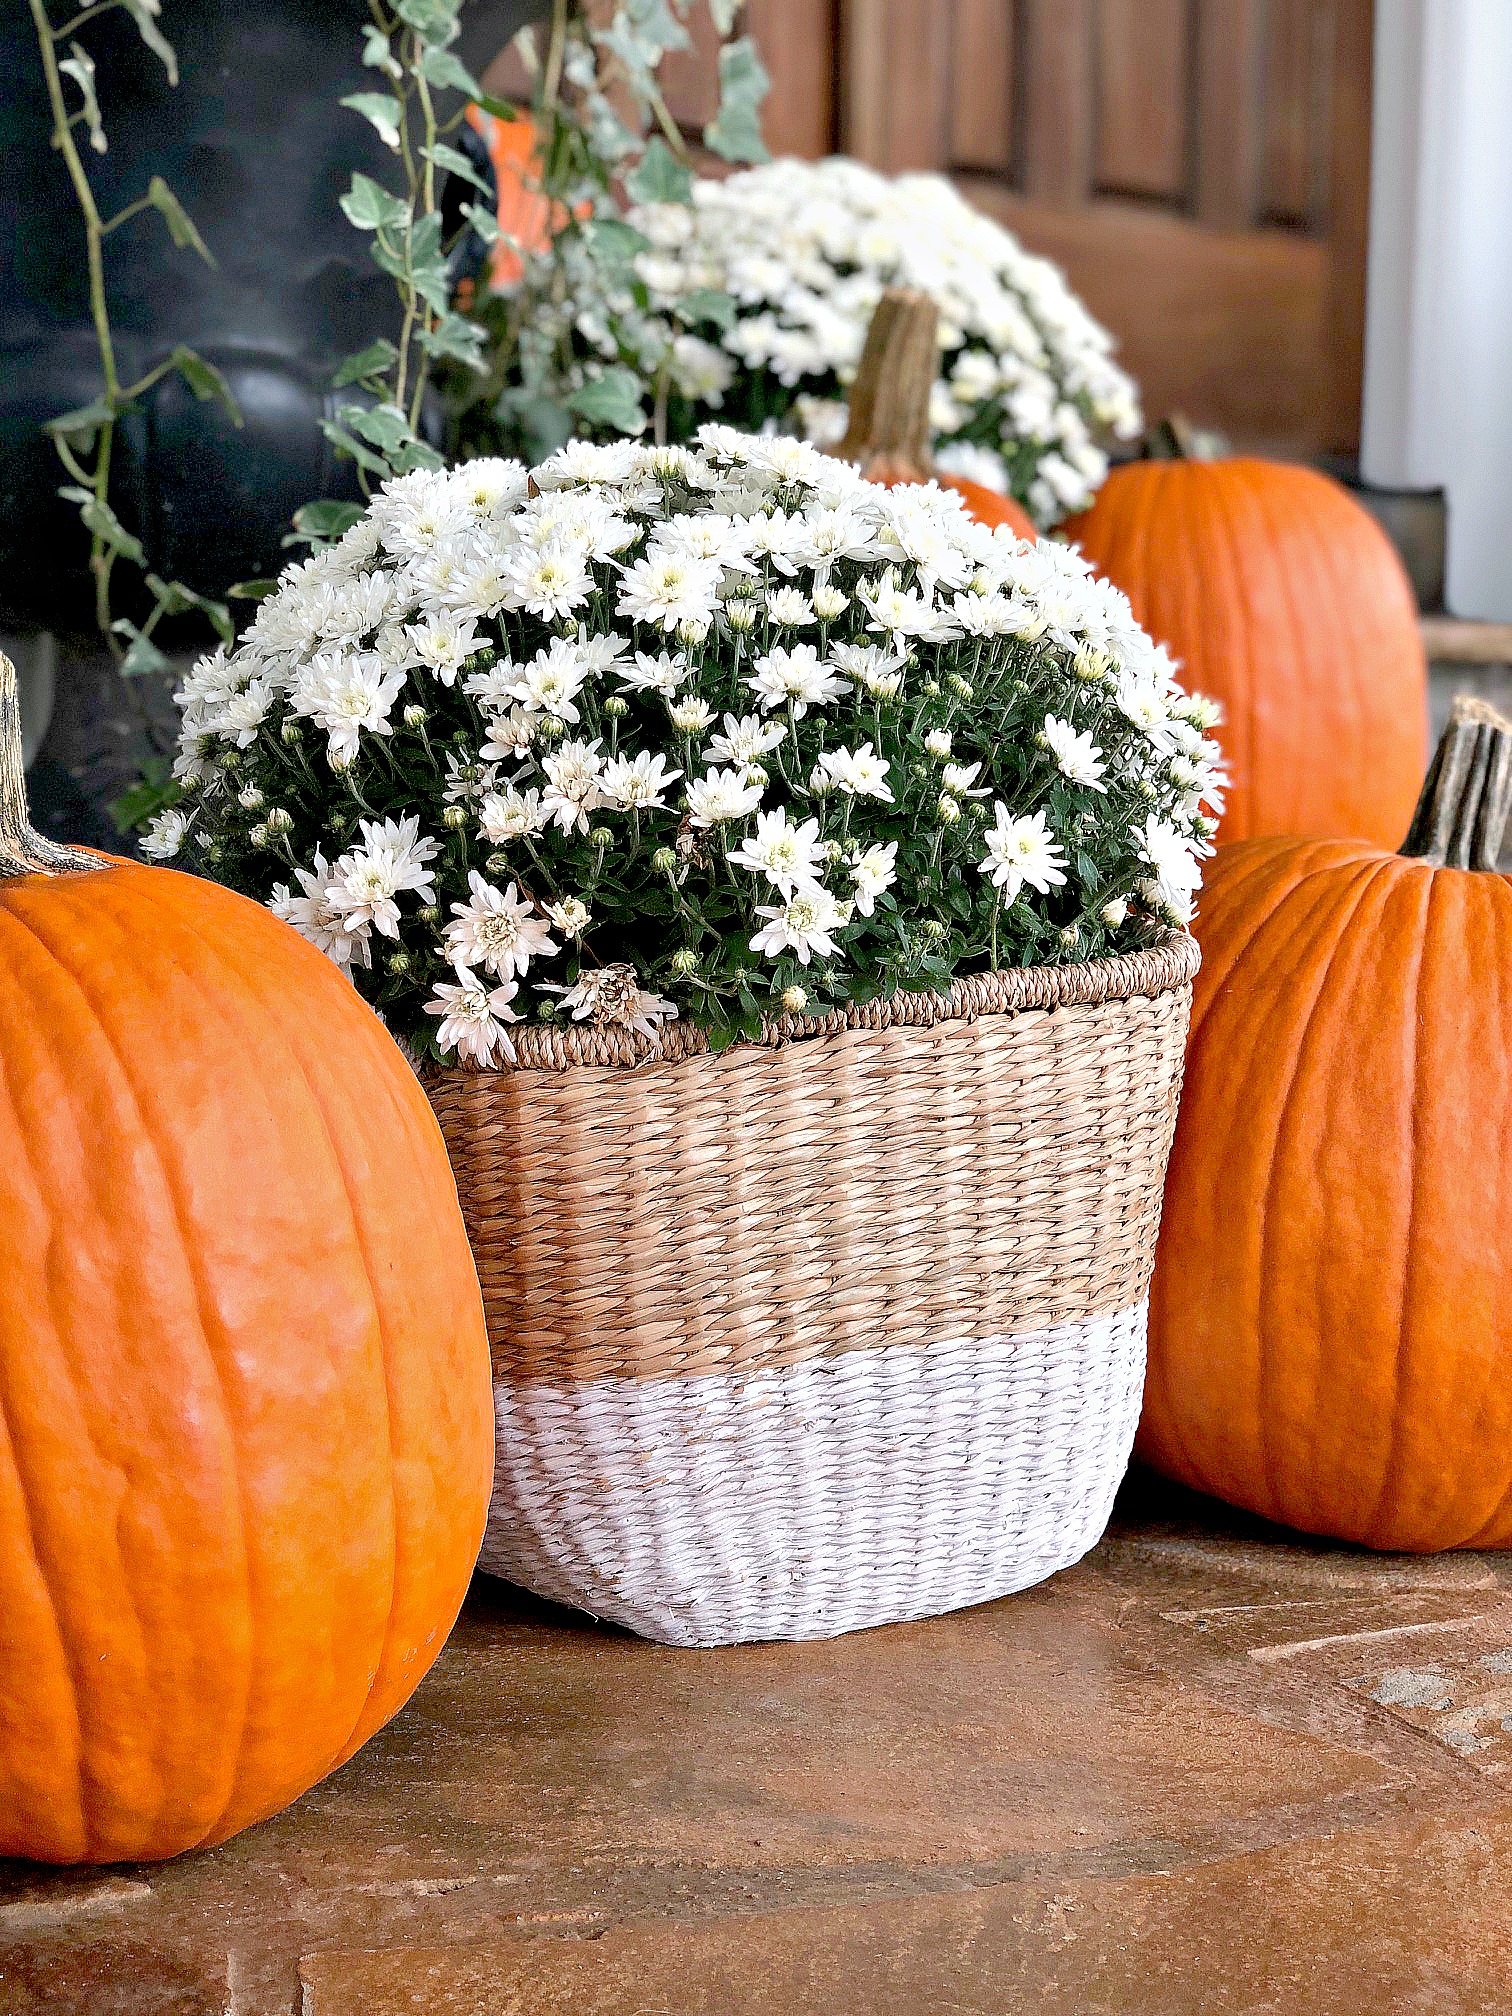 Four things every Porch should have this Fall Season